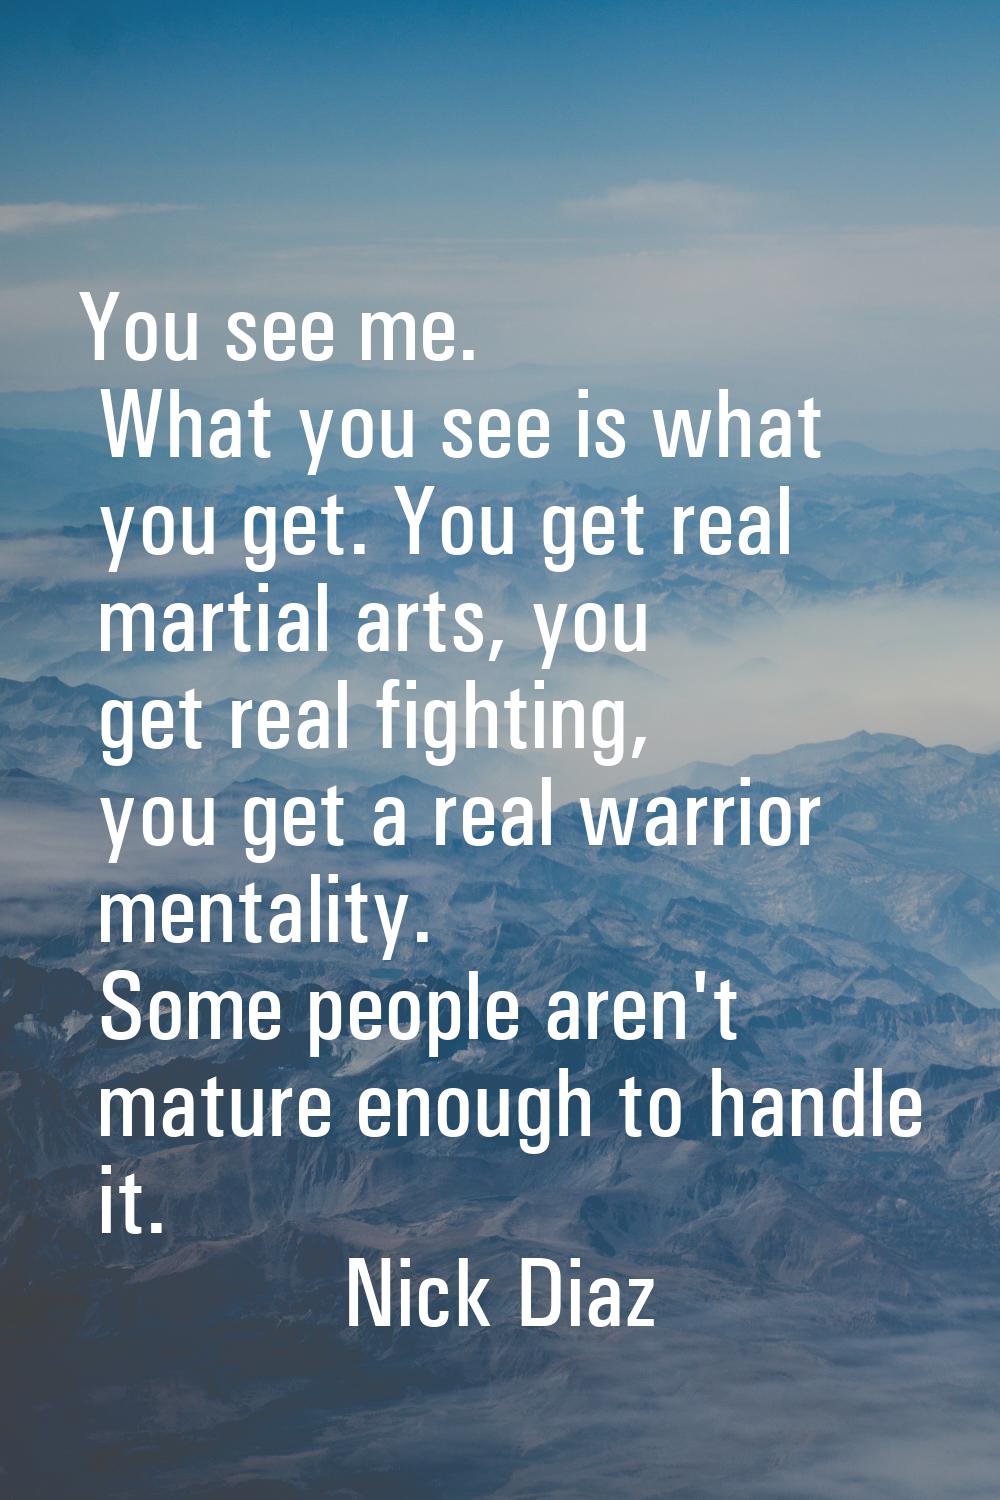 You see me. What you see is what you get. You get real martial arts, you get real fighting, you get